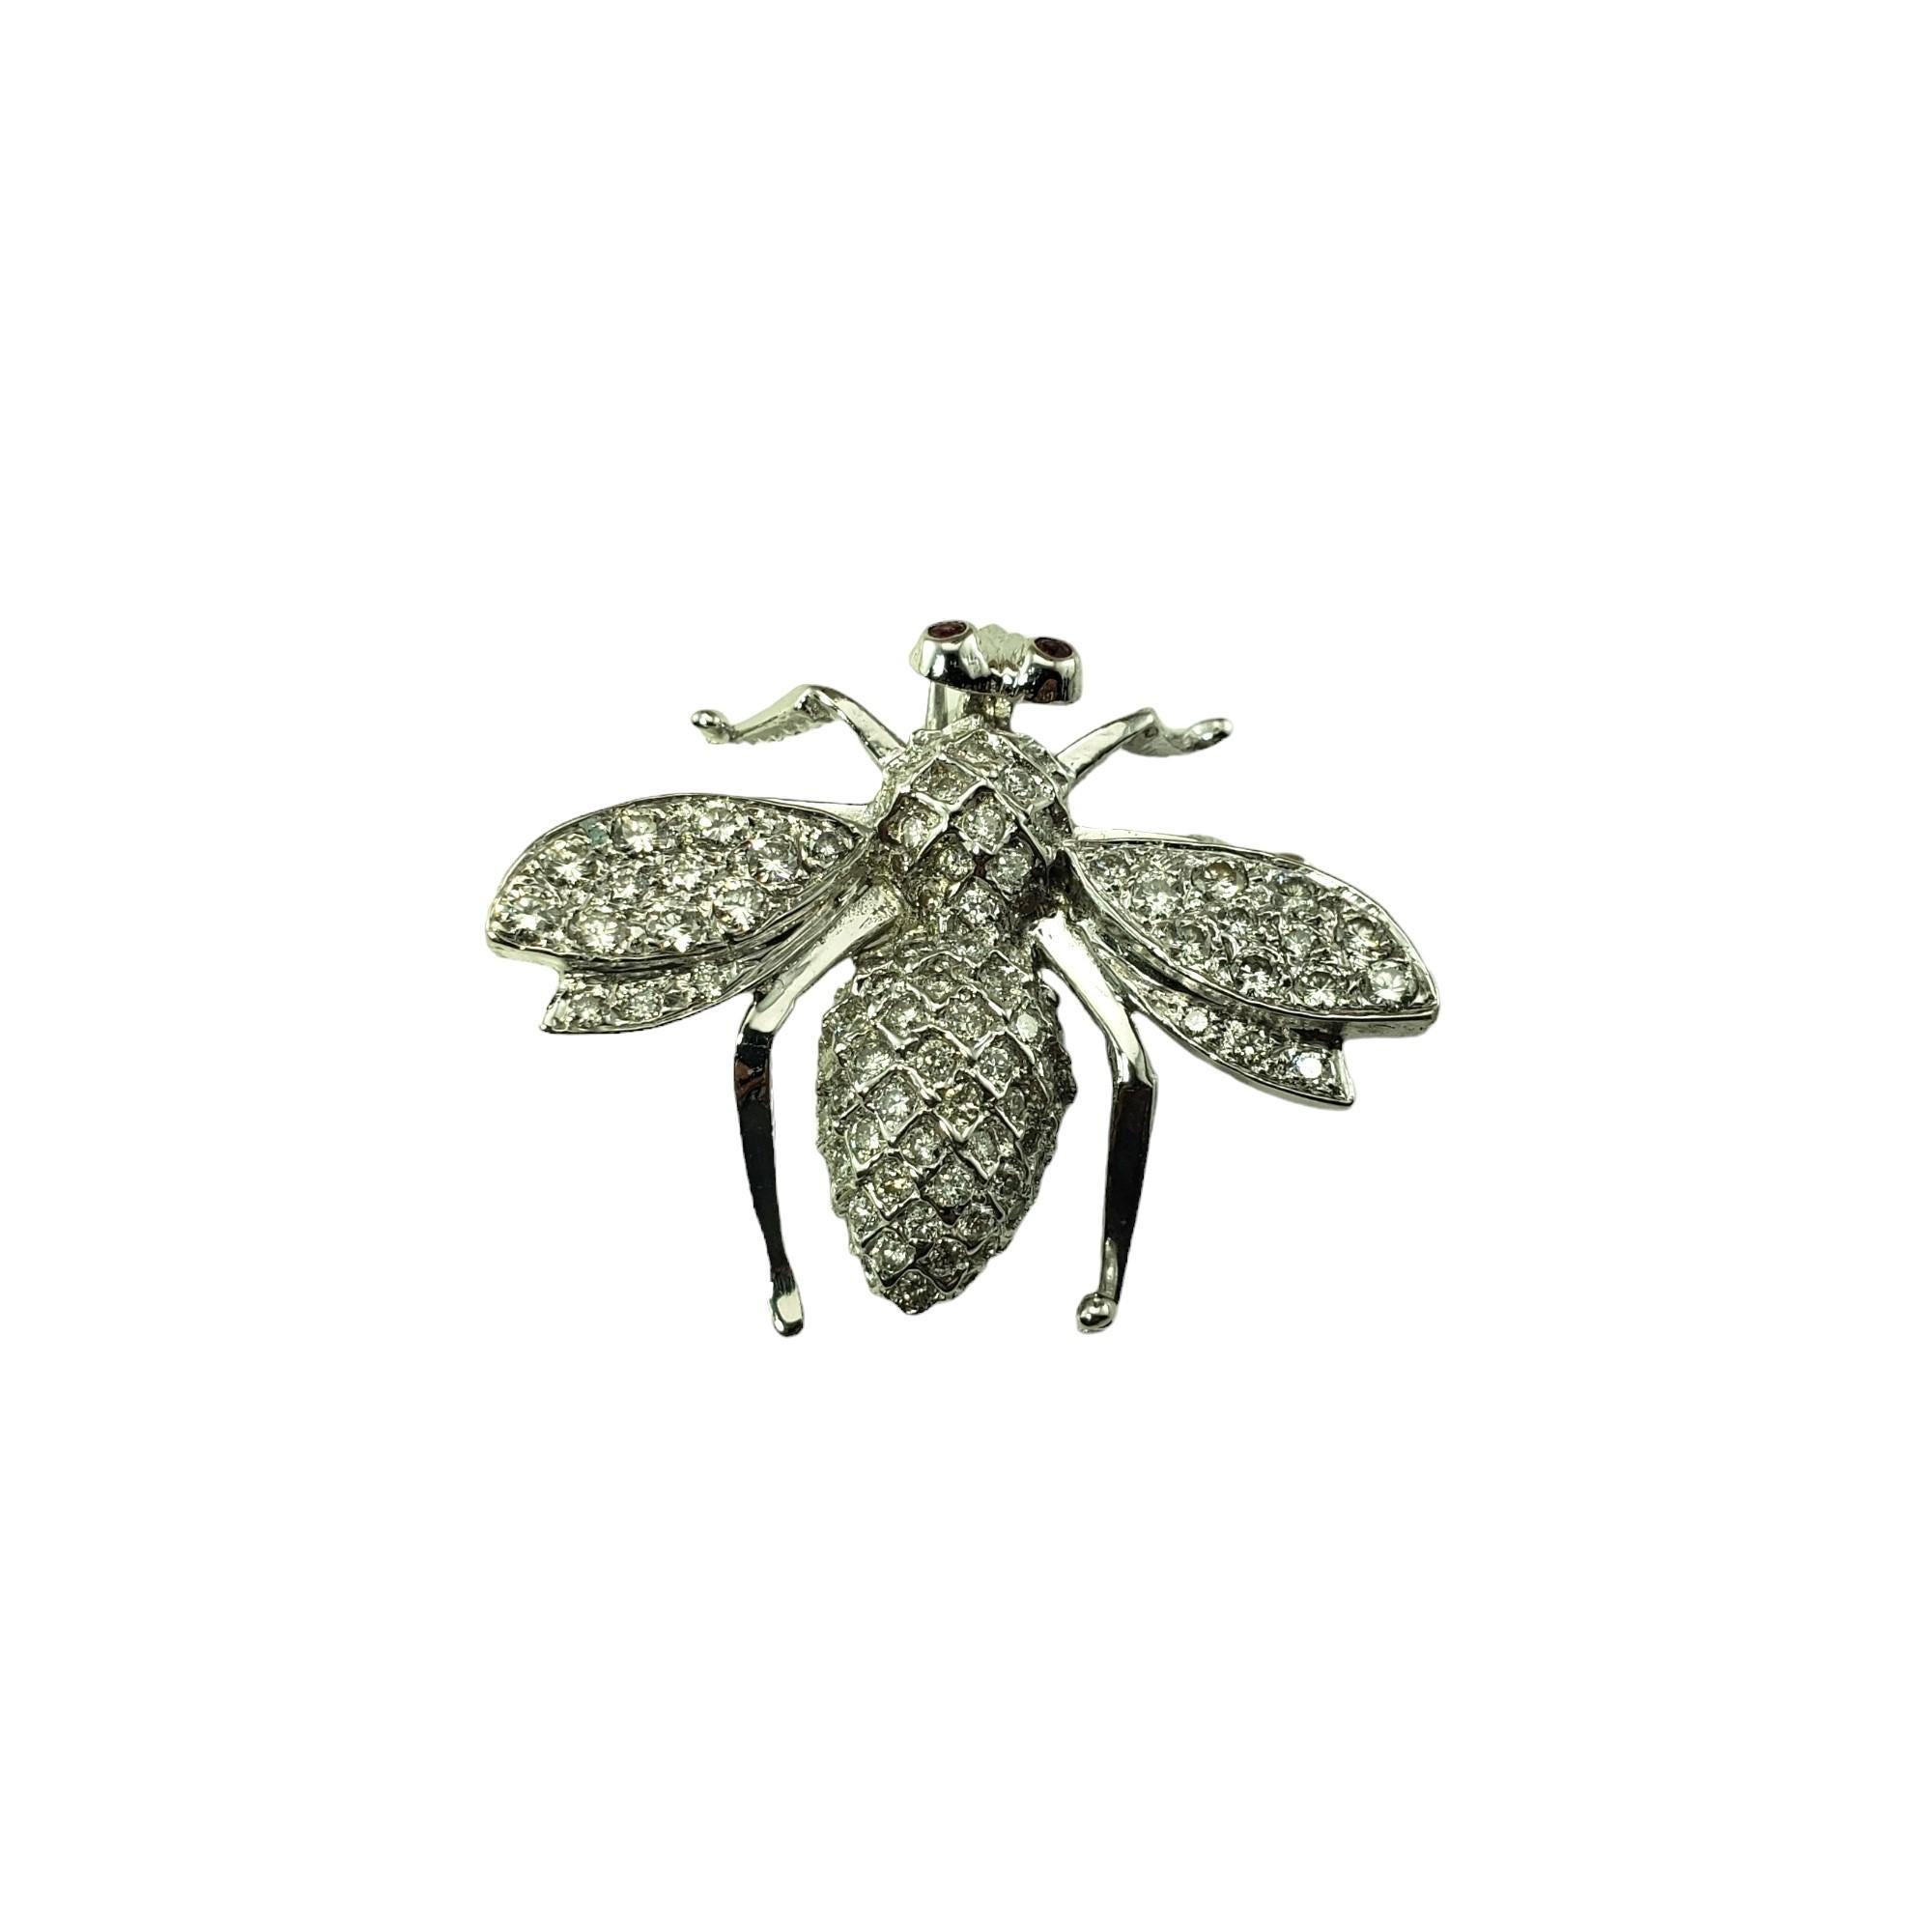 Vintage 14 Karat White Gold and Diamond Bee Brooch/Pin-

This sparkling bee brooch features 93 round brilliant cut diamonds set in beautifully detailed 14K white gold.  Accented with two red faceted eyes.

Approximate total diamond weight:  1.10